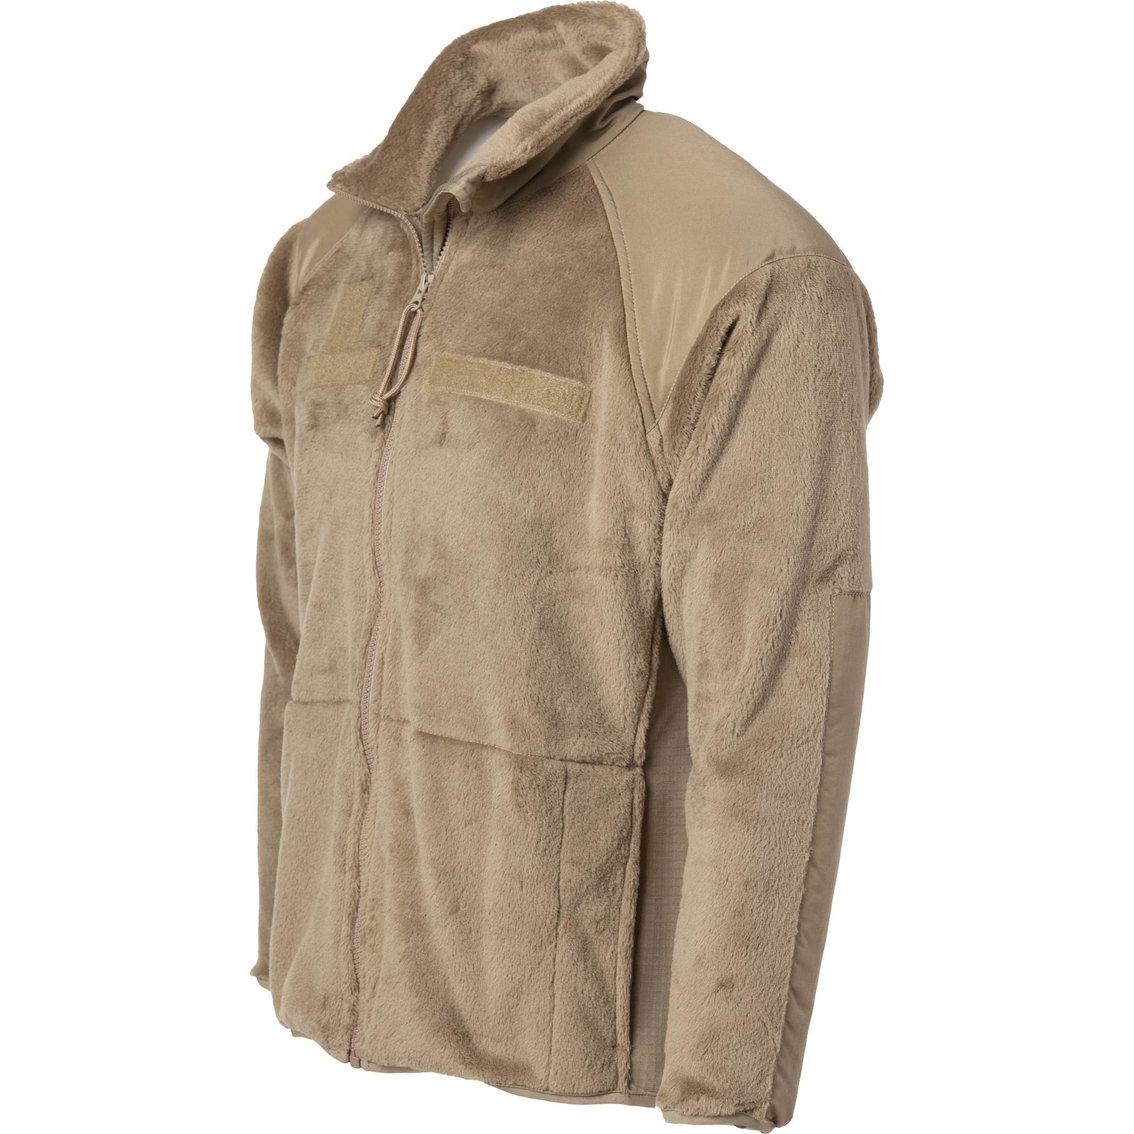 Dlats Army Cold Weather Fleece Jacket - Army Military